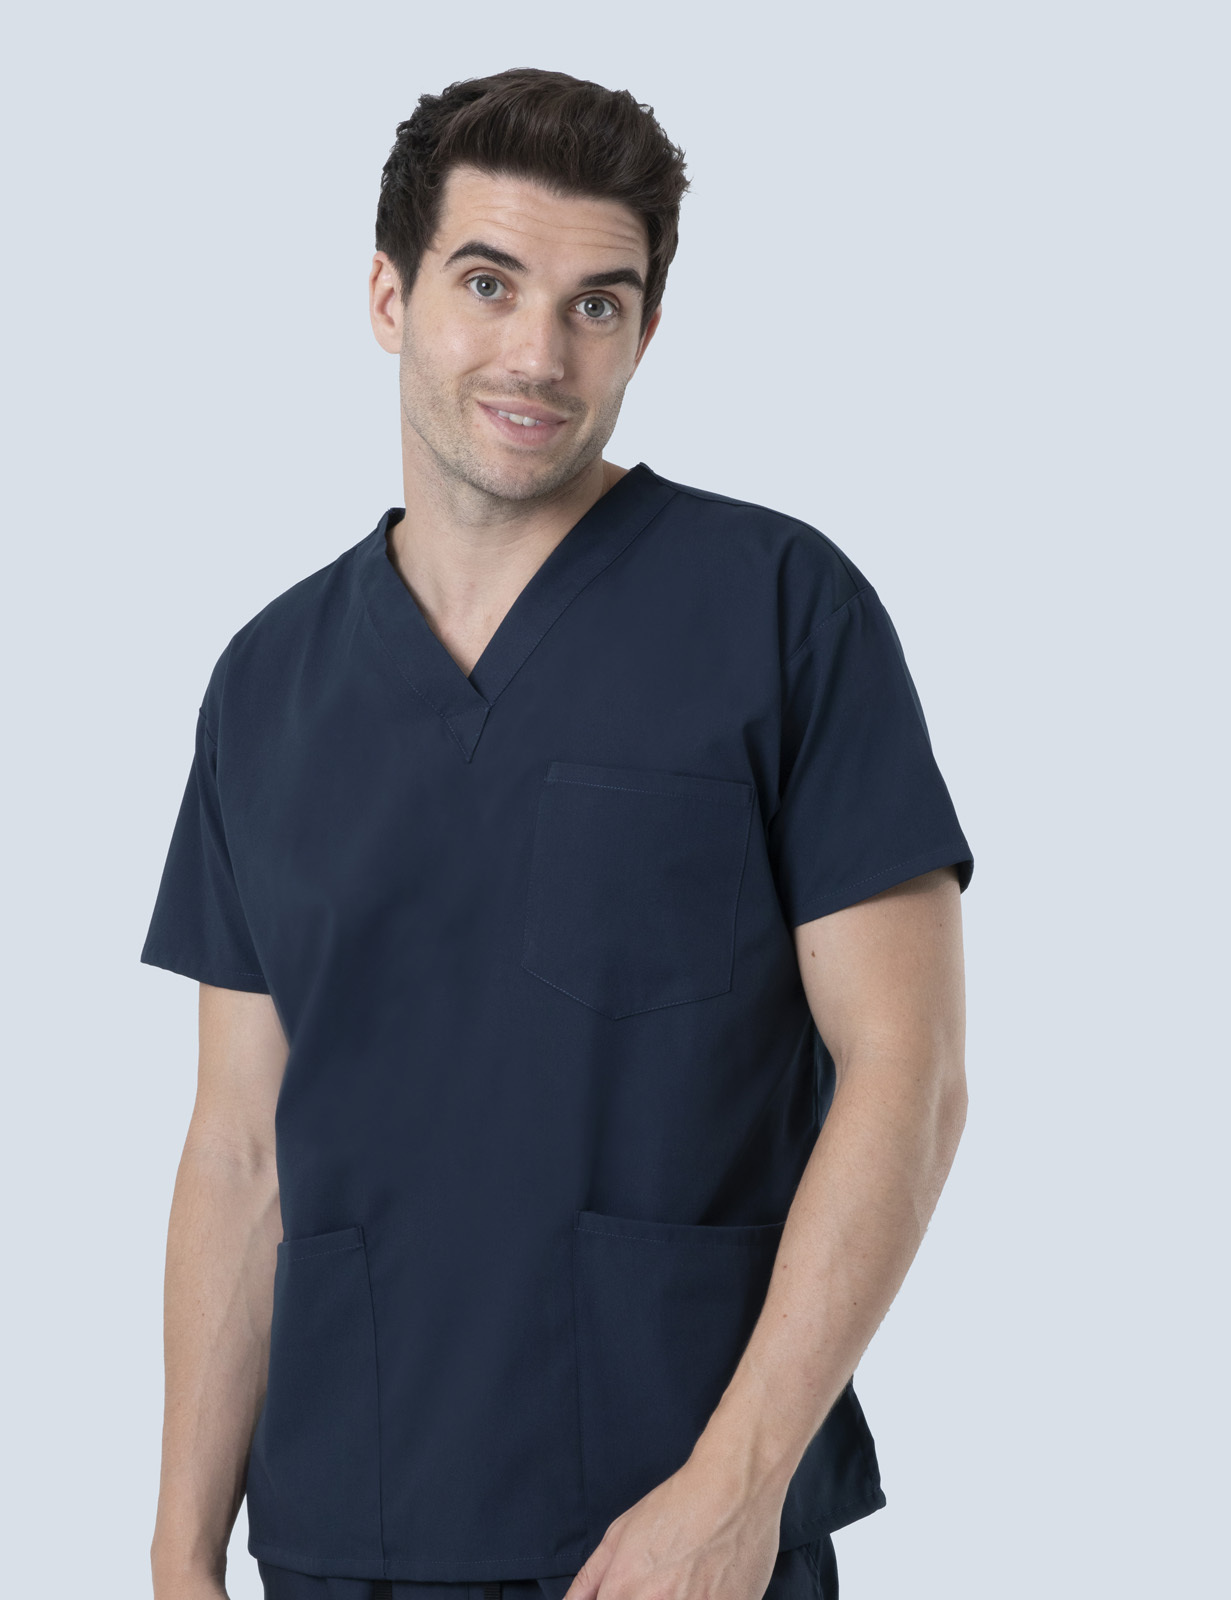 The Alfred Hospital - ICU (4 Pocket Scrub Top and Cargo Pants in Navy incl Logos)